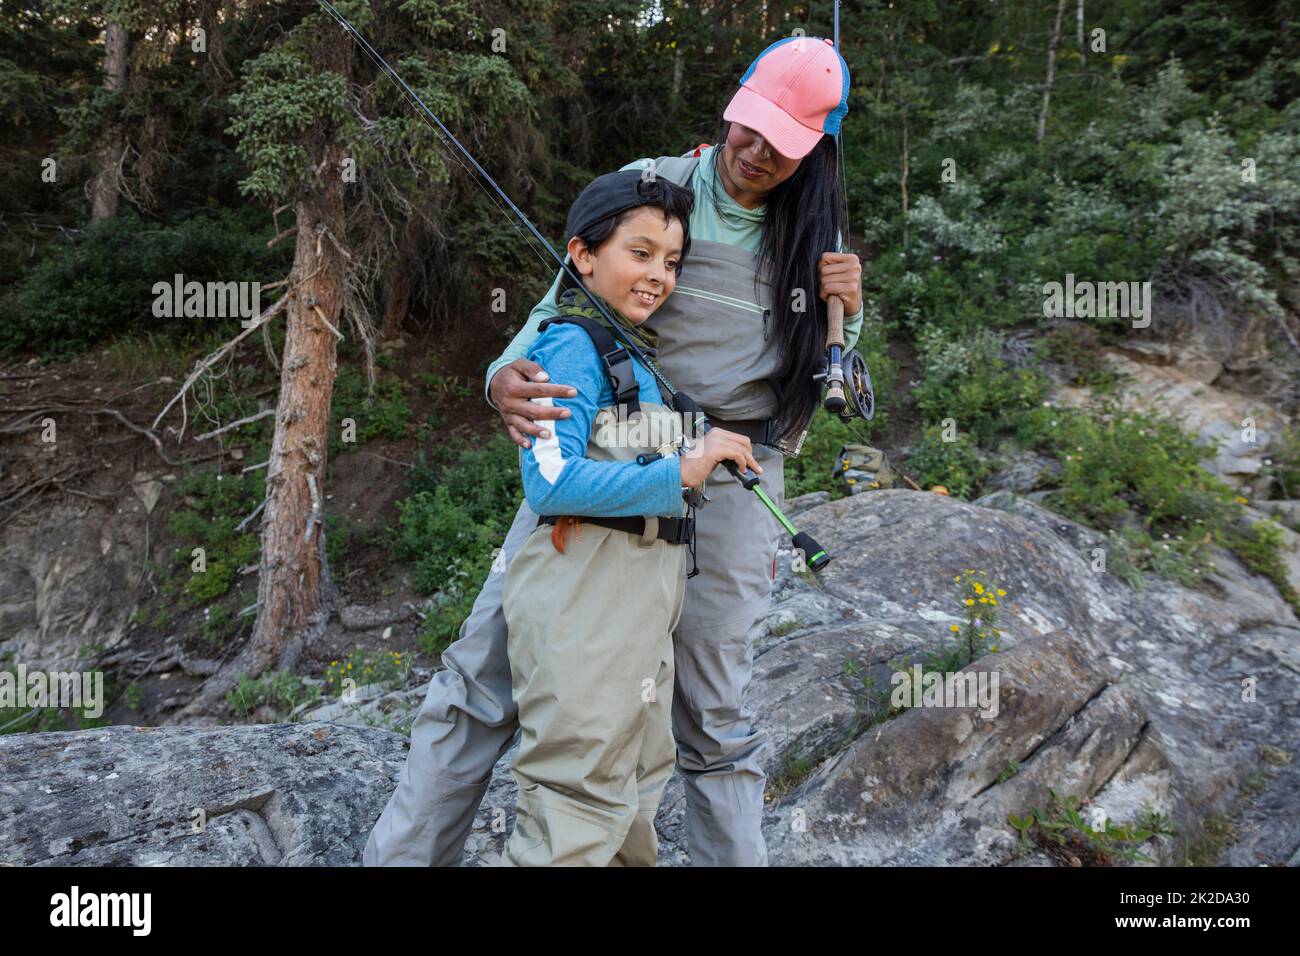 Mother and son holding fishing rods and smiling Stock Photo